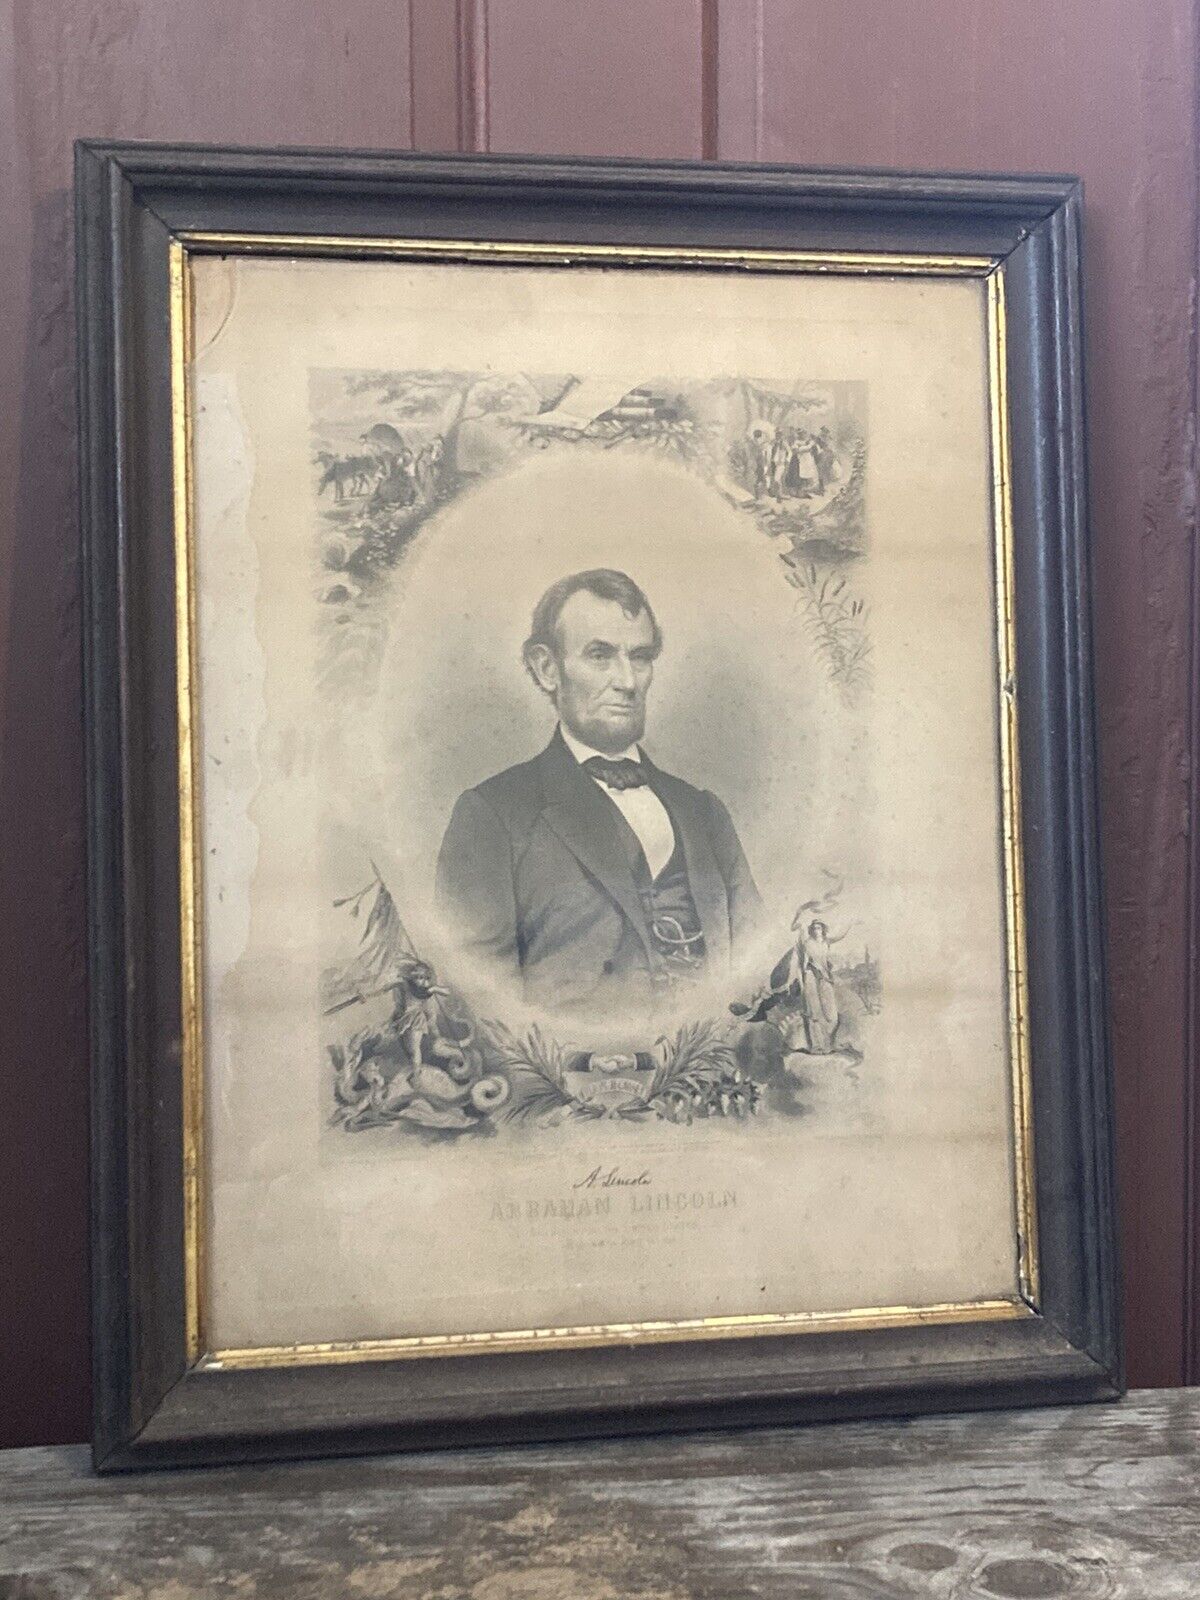 Abraham Lincoln Engraving by J.C. Buttre (Brady Photograph)